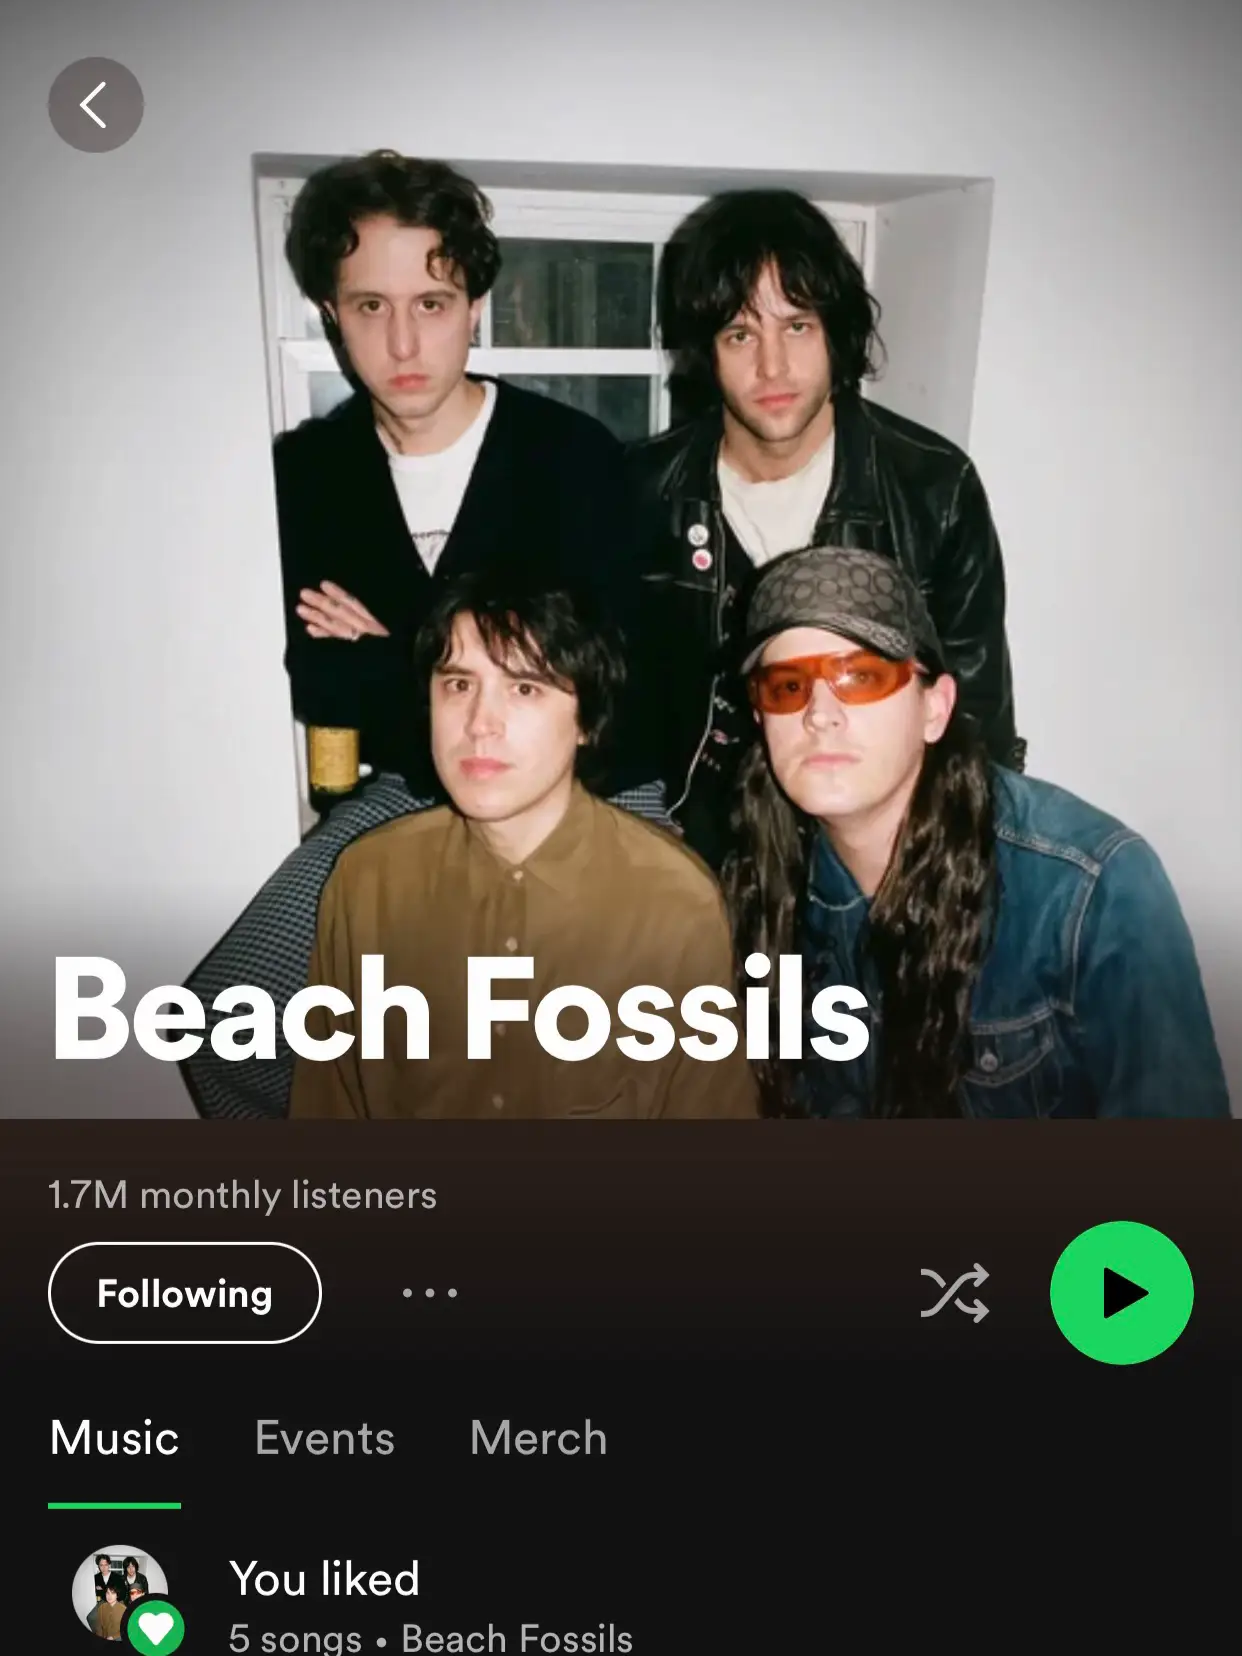  A picture of a band with the words "B Beach Fossils" on it.